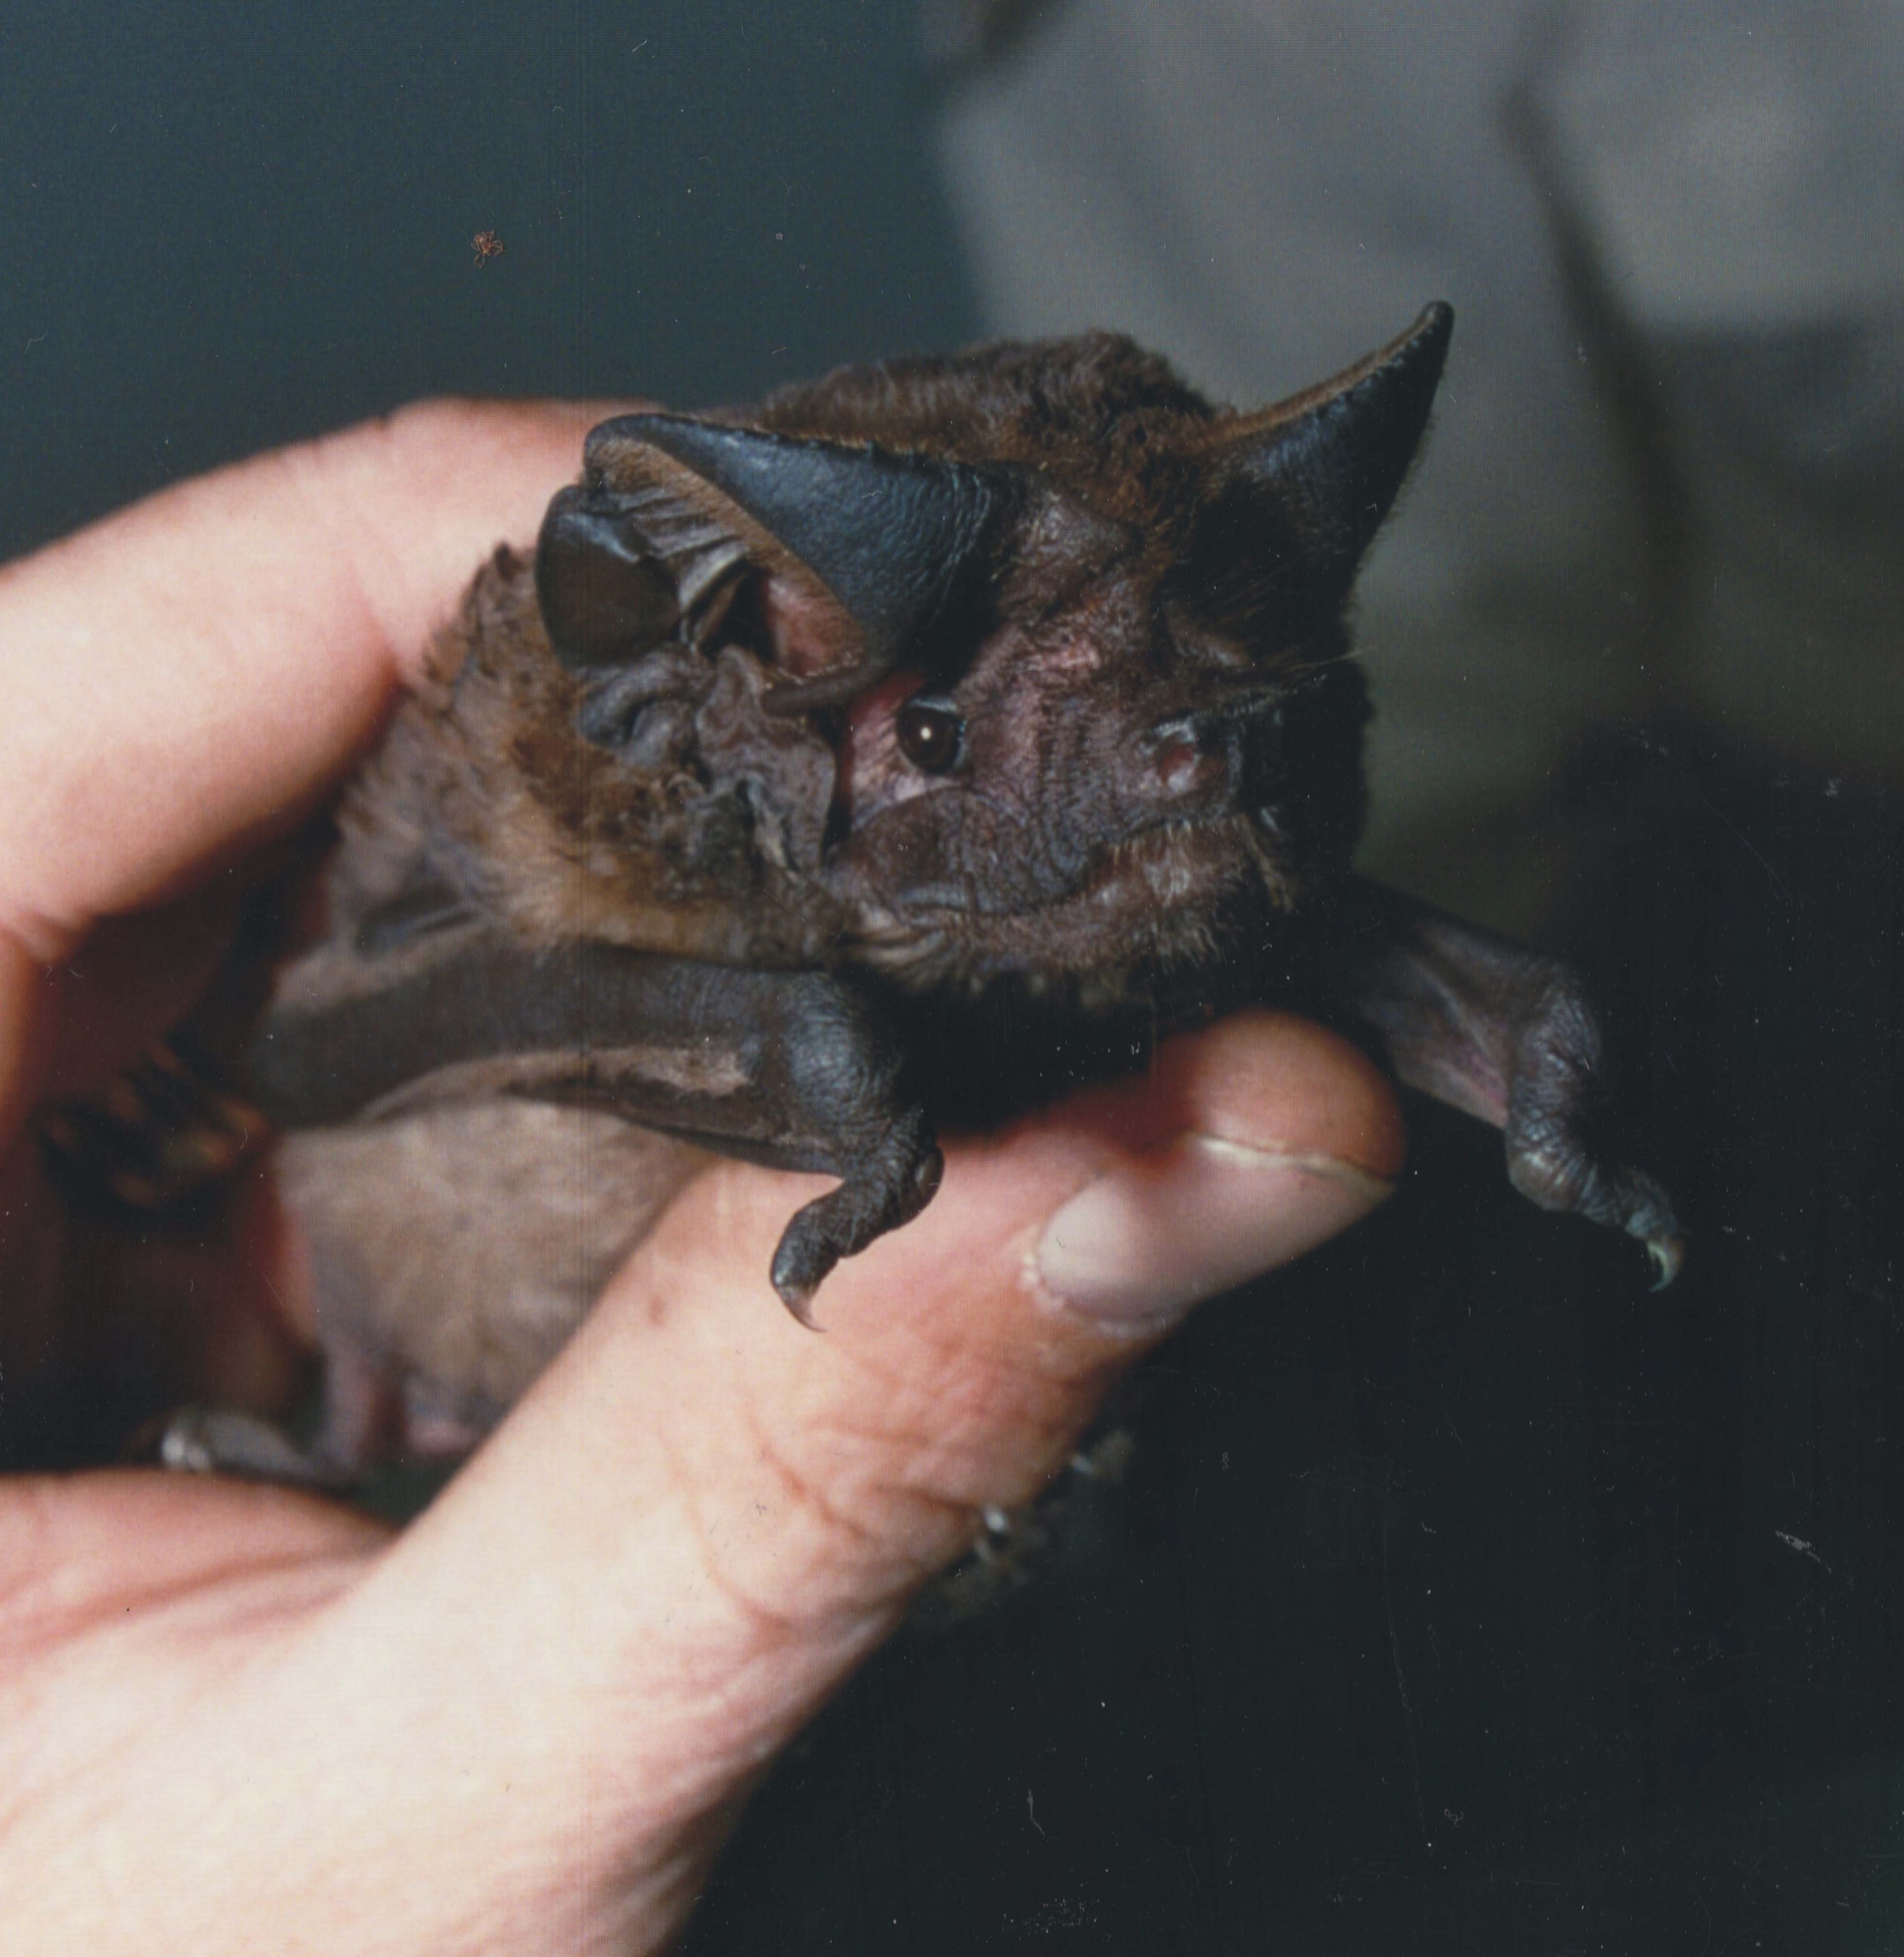 The White-striped freetail bat is one of up to nine species of microbats using the bushland areas in Yarra for food, shelter and breeding. It is the only microbat with an echolocation call that is audible to humans.  Microbats are prolific insect eaters, consuming up to 33% of their body weight per night, therefore they play a very important role in controlling insect populations, and maintaining eco-system equilibrium.